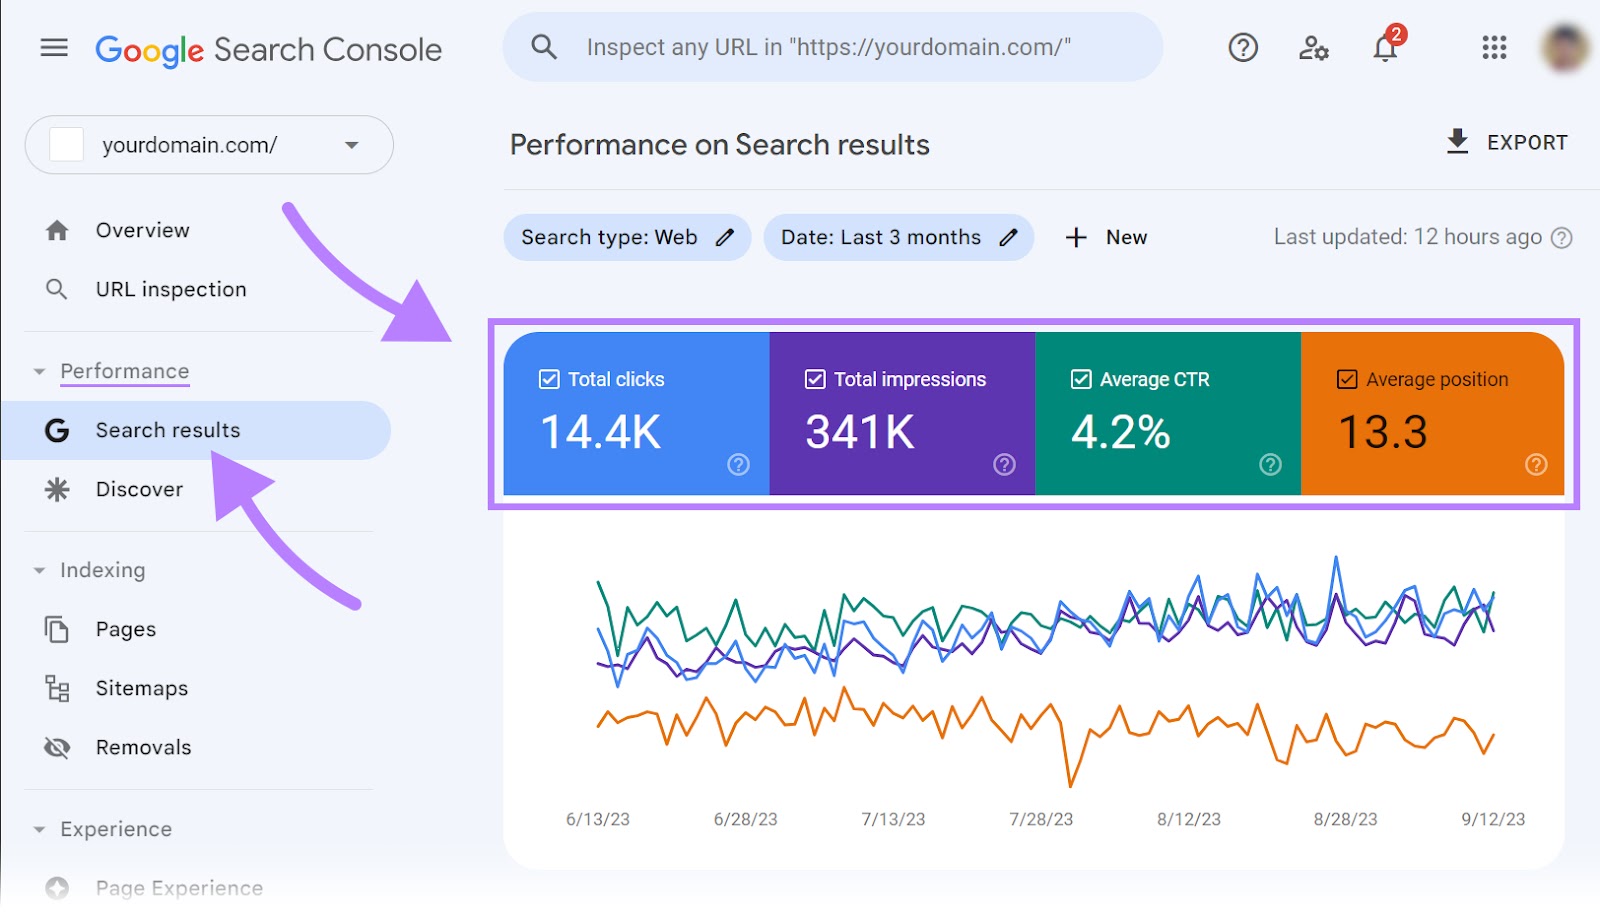 Performance on search results section of Google Search Console